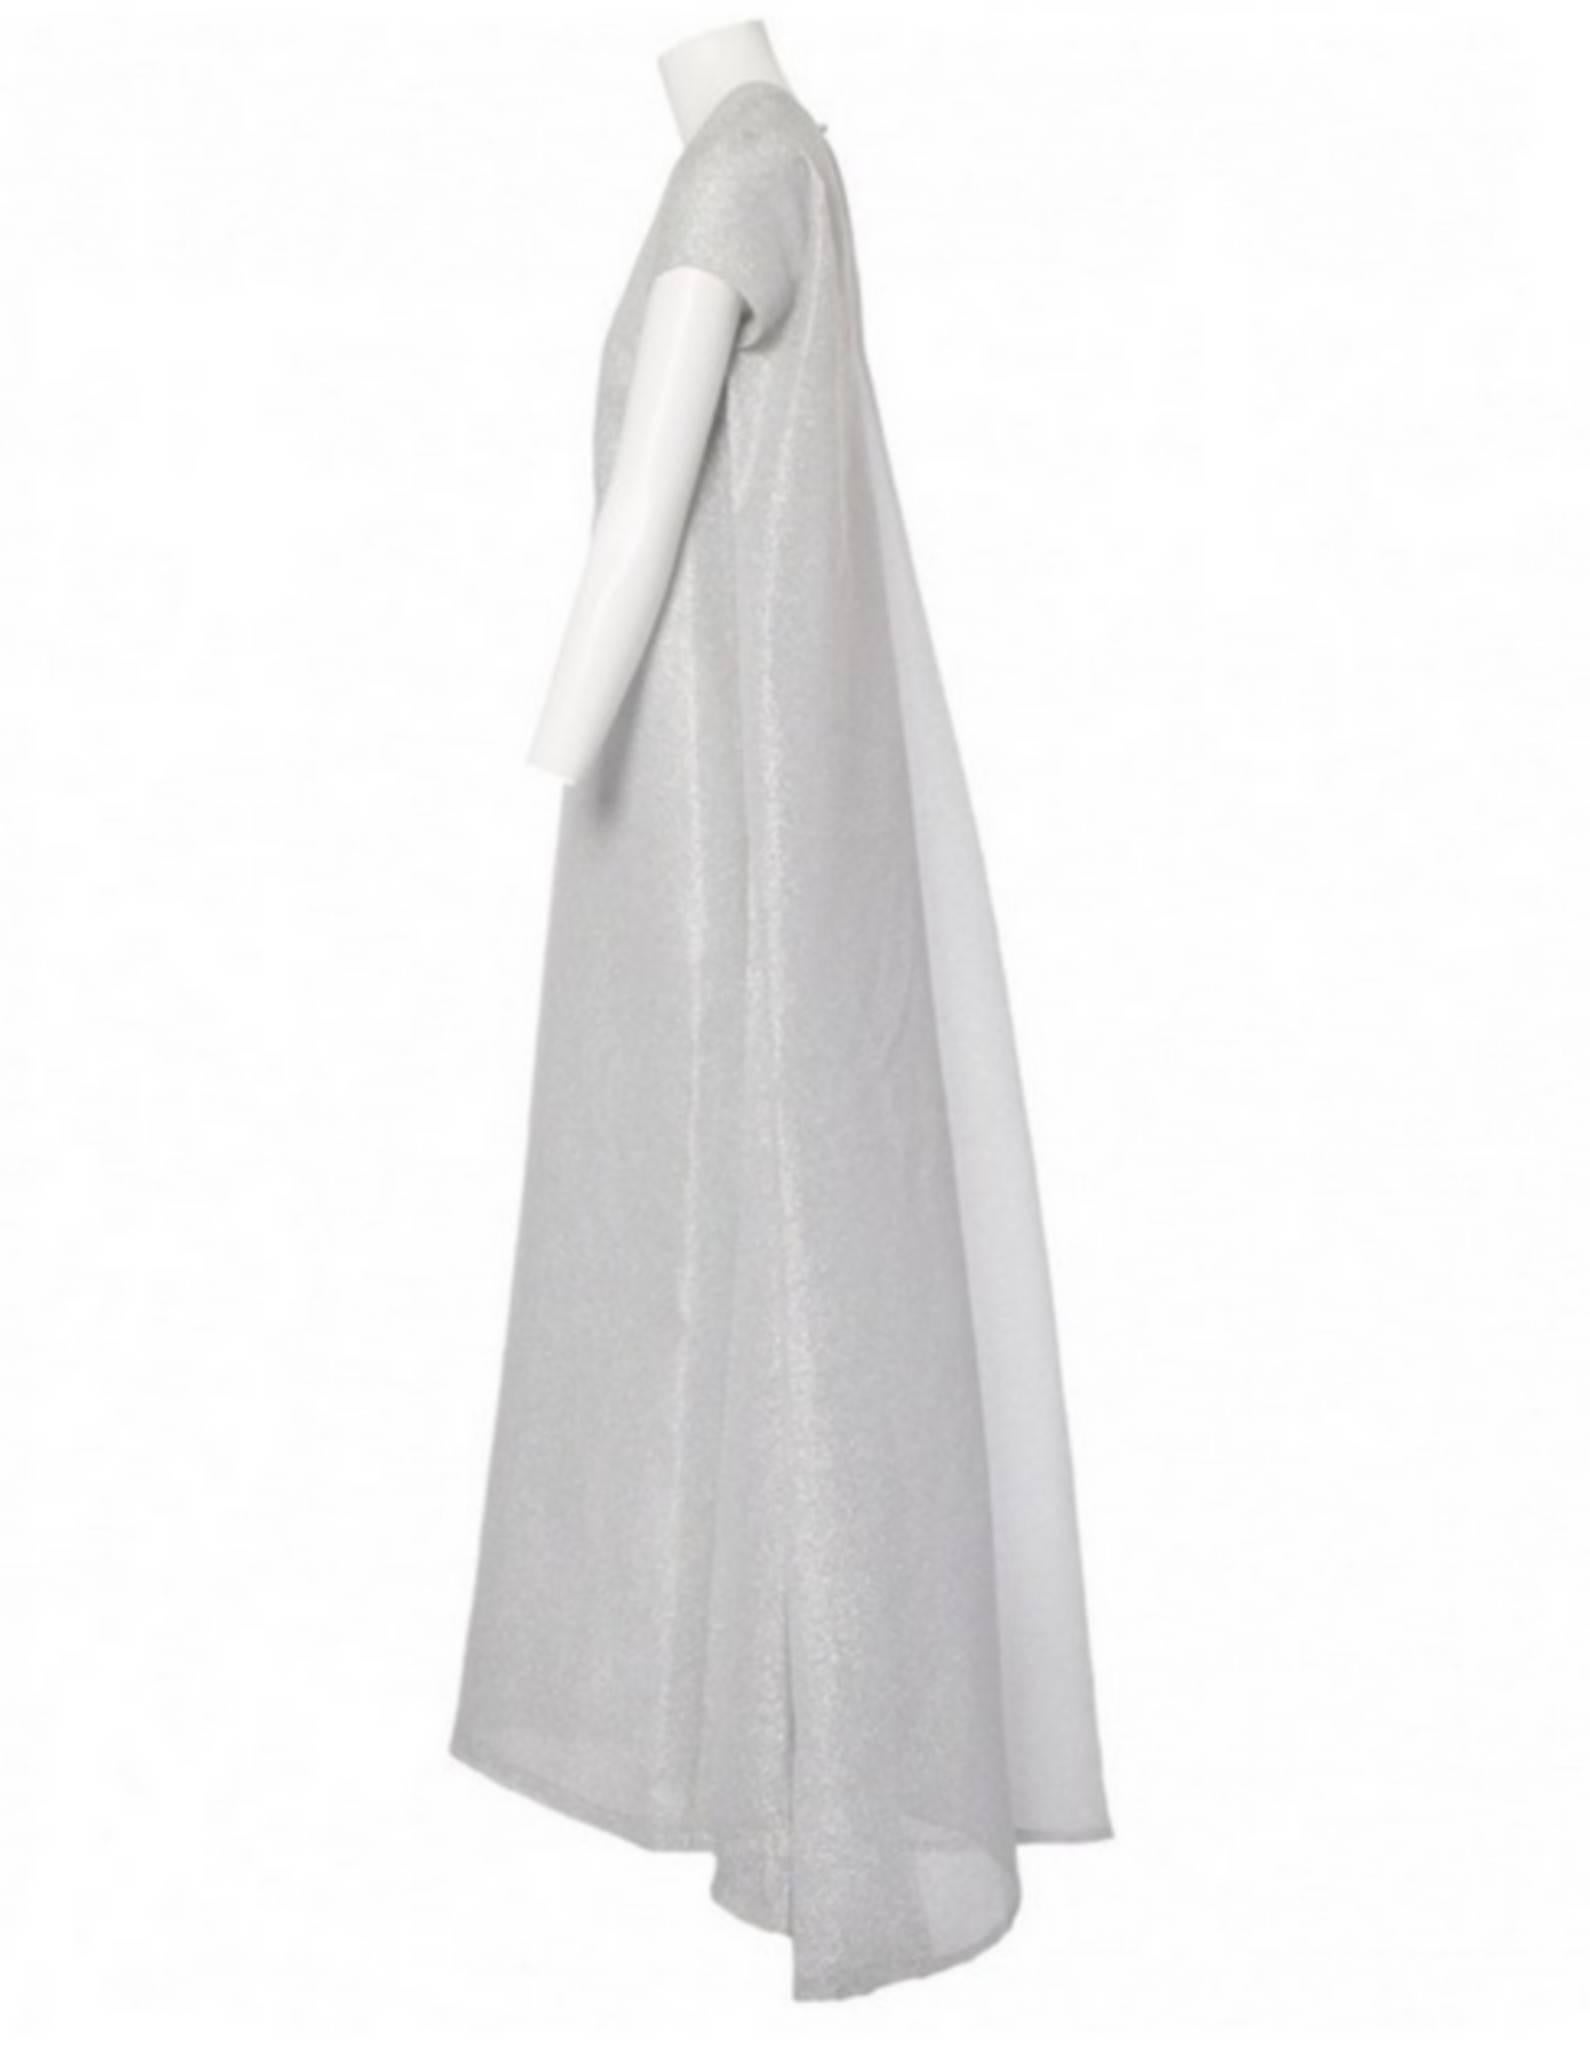 The toast of England’s upper crust, the designer delivers refined feminine frocks that render the modern woman perfectly posh. Destined to make a shining statement, this silver Emilia Wickstead gown shines for its breathtaking silhouette, with a